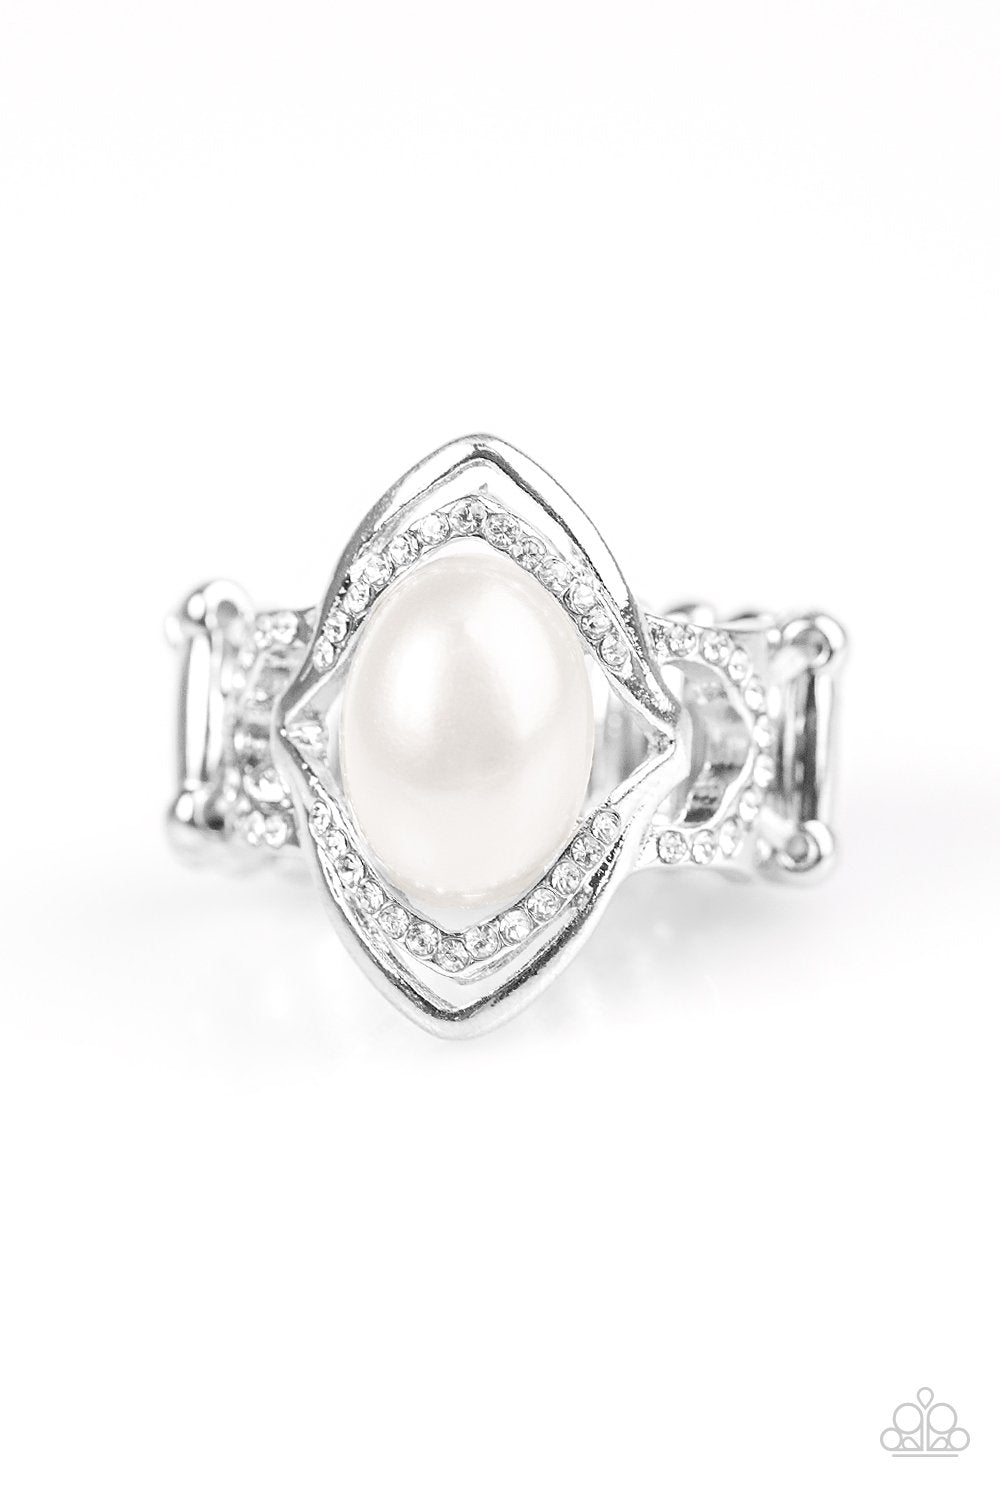 Positively Posh White Pearl Ring - Paparazzi Accessories-CarasShop.com - $5 Jewelry by Cara Jewels